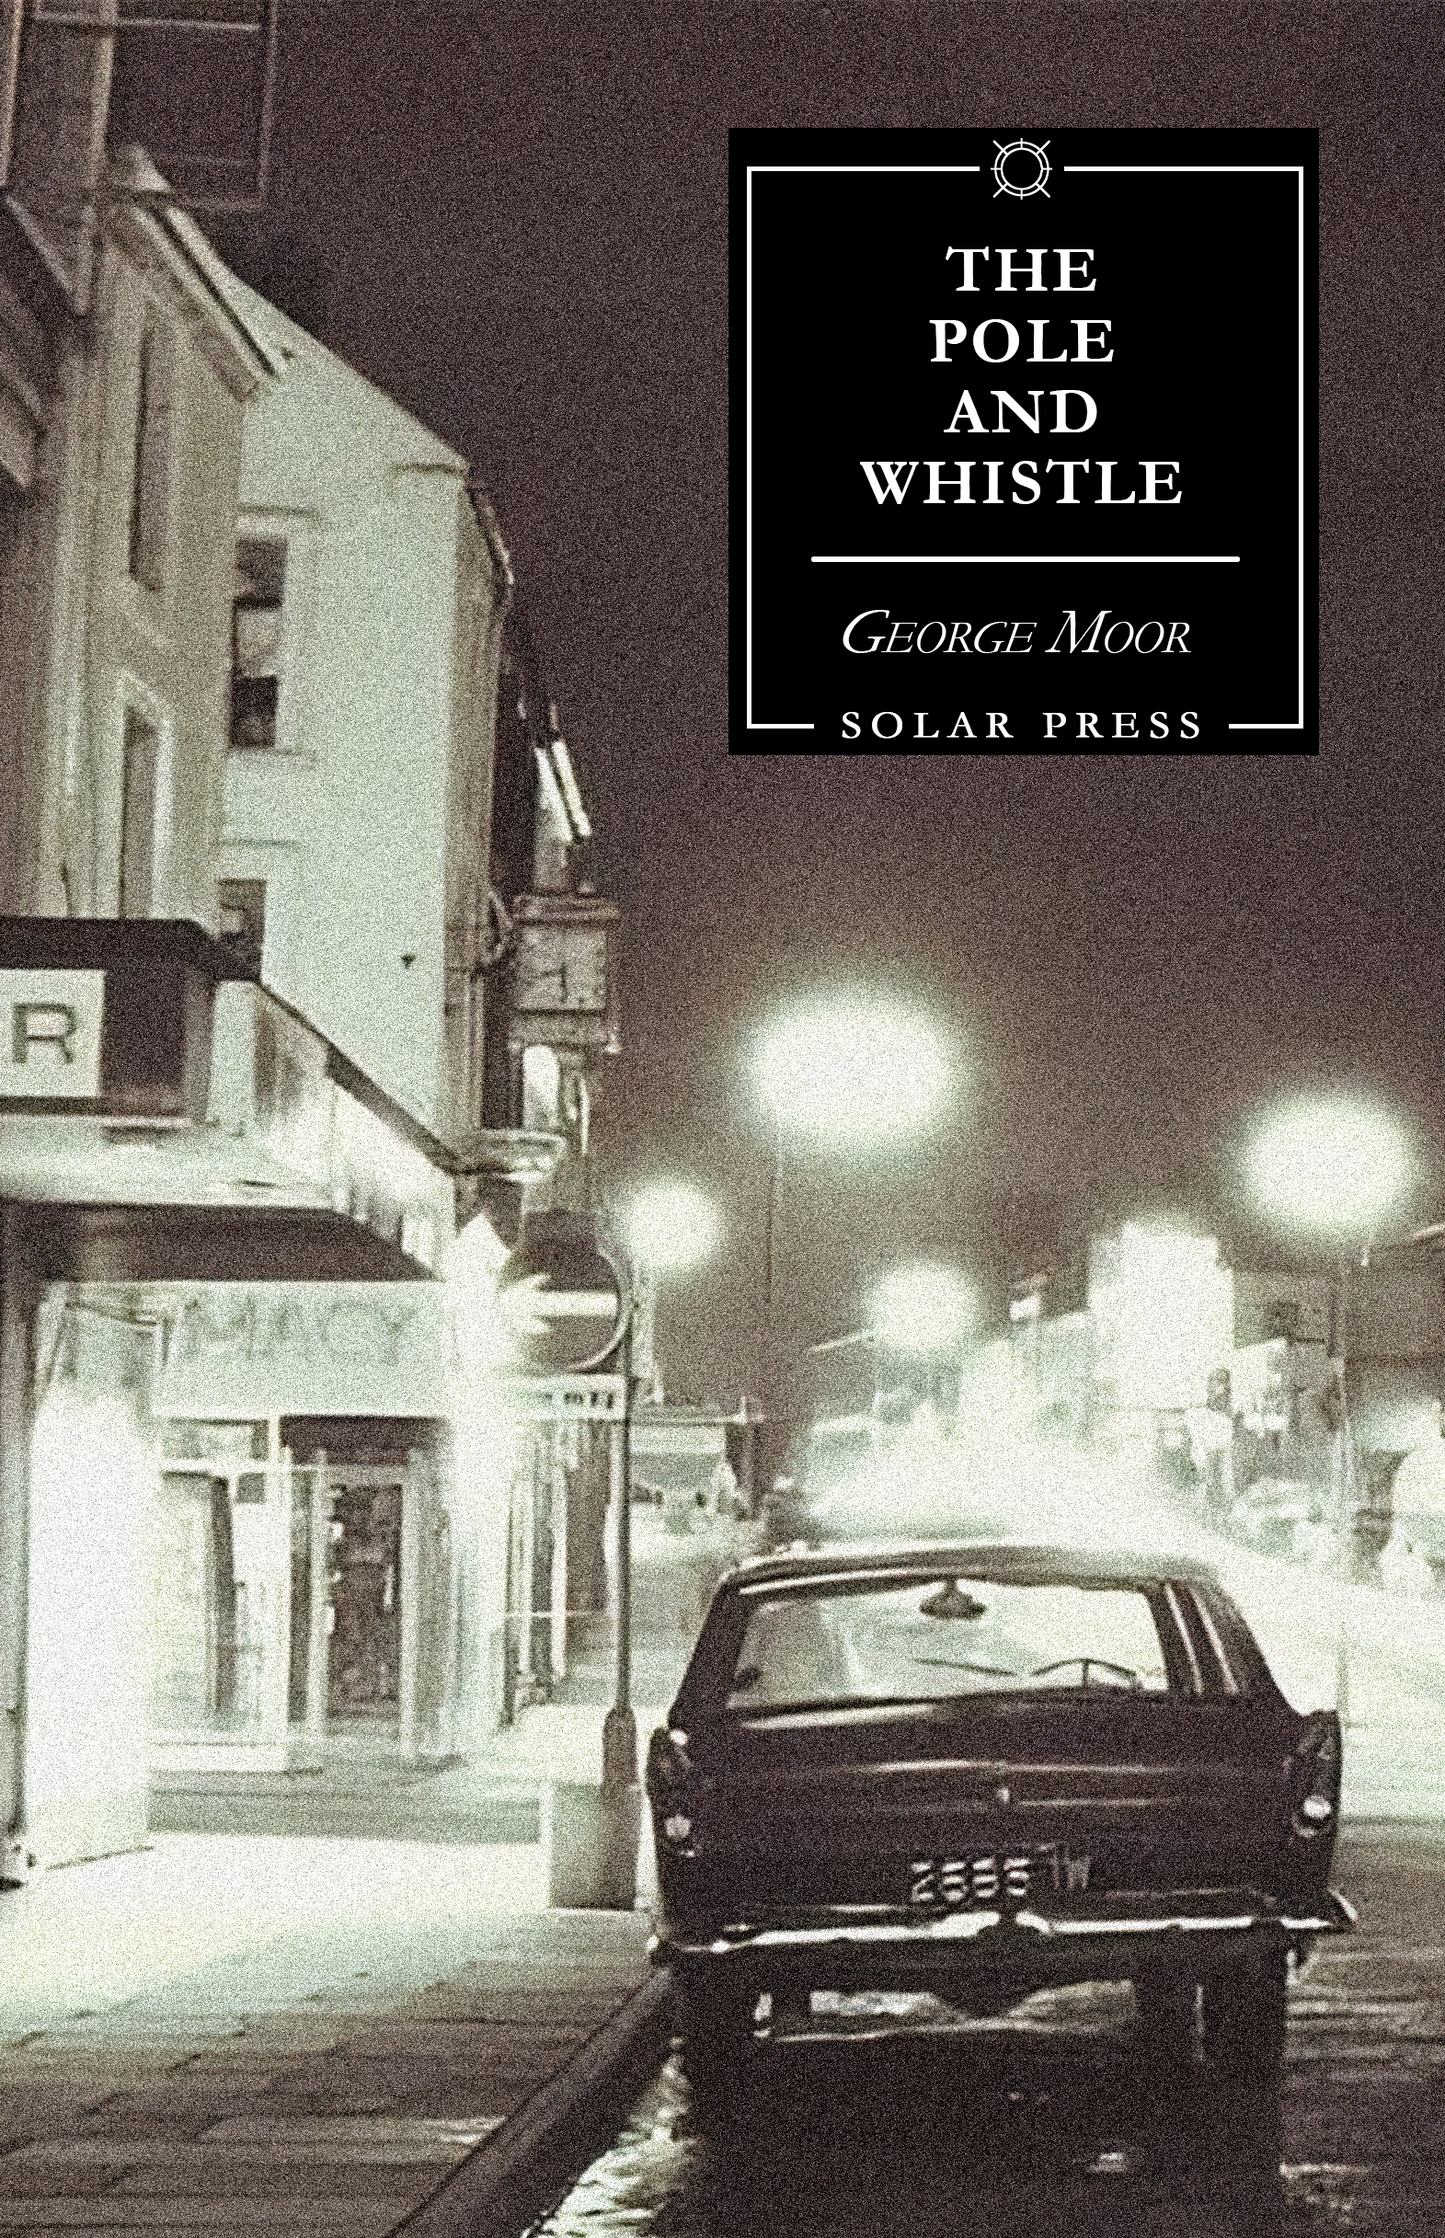 The Pole and Whistle by George Moor (PRE-ORDER, SHIPS NOVEMBER 2023)